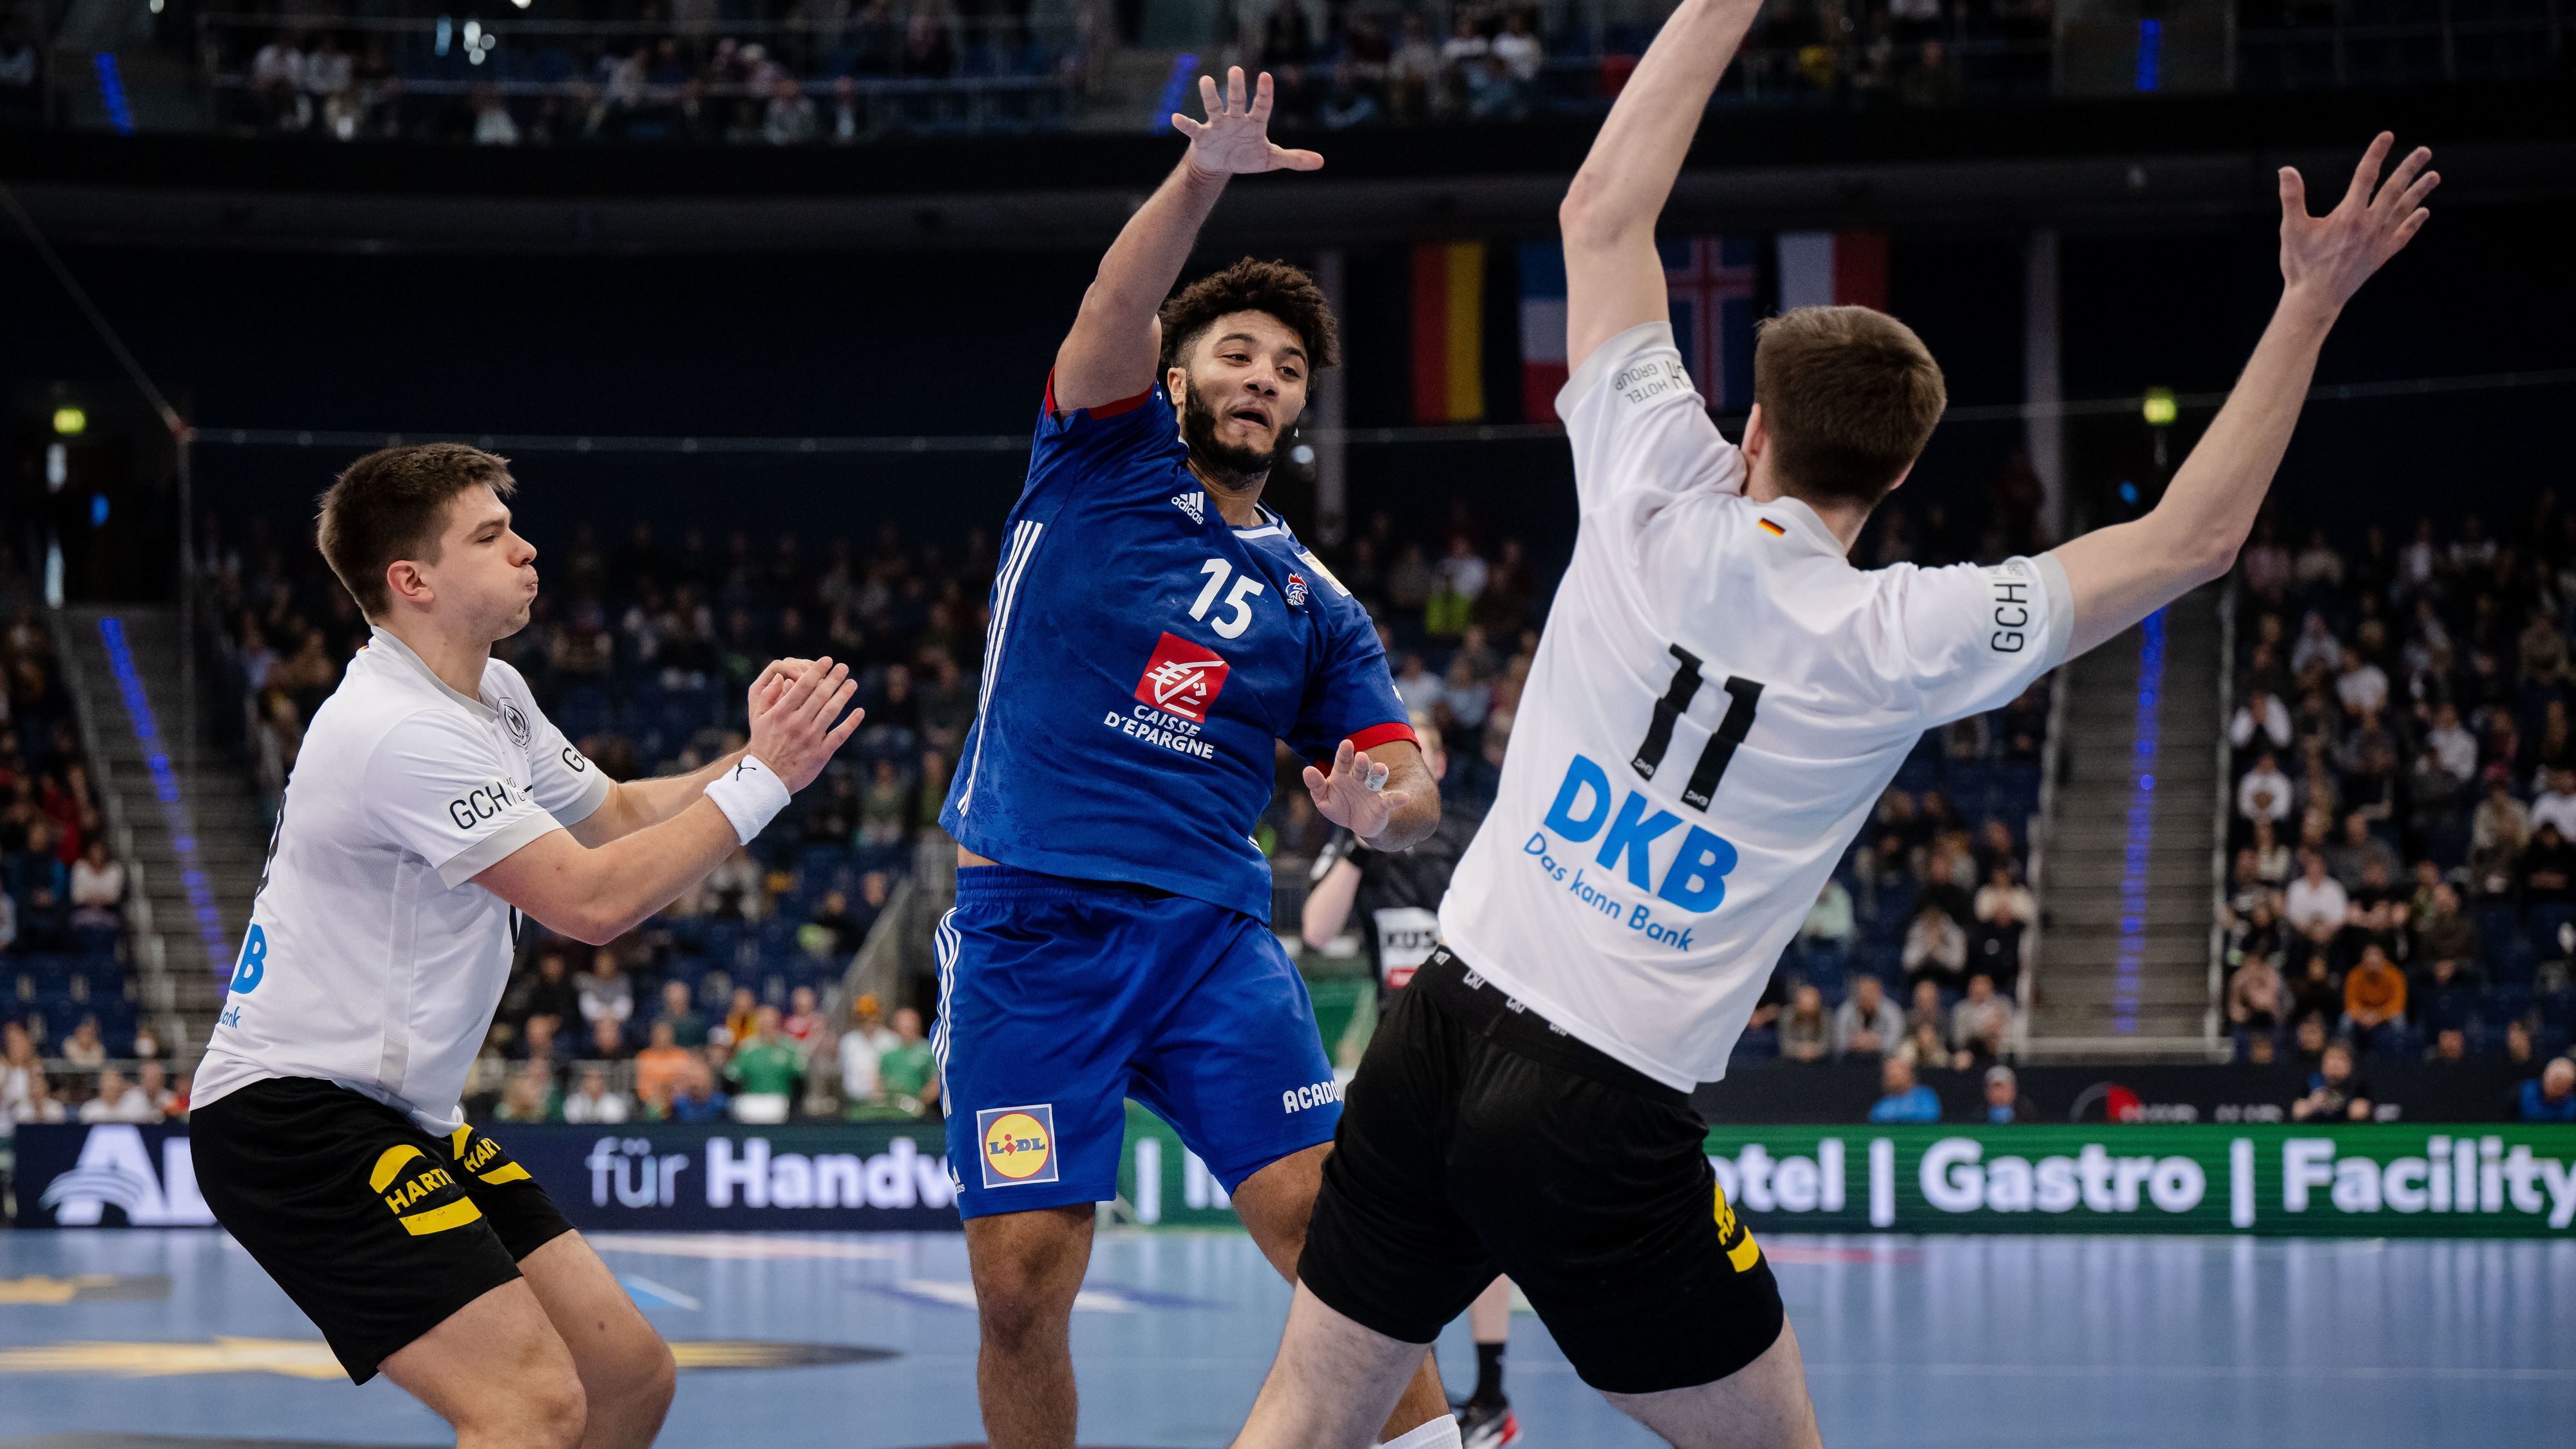 Thibault Chevalier of France is tackled by Felix Eissing (R) and Renars Uscins (L) of Germany the U21 handball international friendly match between Germany and Iceland at ZAG-Arena on January 08, 2023 in Hanover, Germany. (Photo by Marvin Ibo Guengoer - GES Sportfoto/Getty Images)

GES/ Handball/ Freundschaftsspiel: Deutschland - Frankreich, 08.01.2023

Handball: Friendly match: Under-21: Germany vs France, Location, January 8, 2023